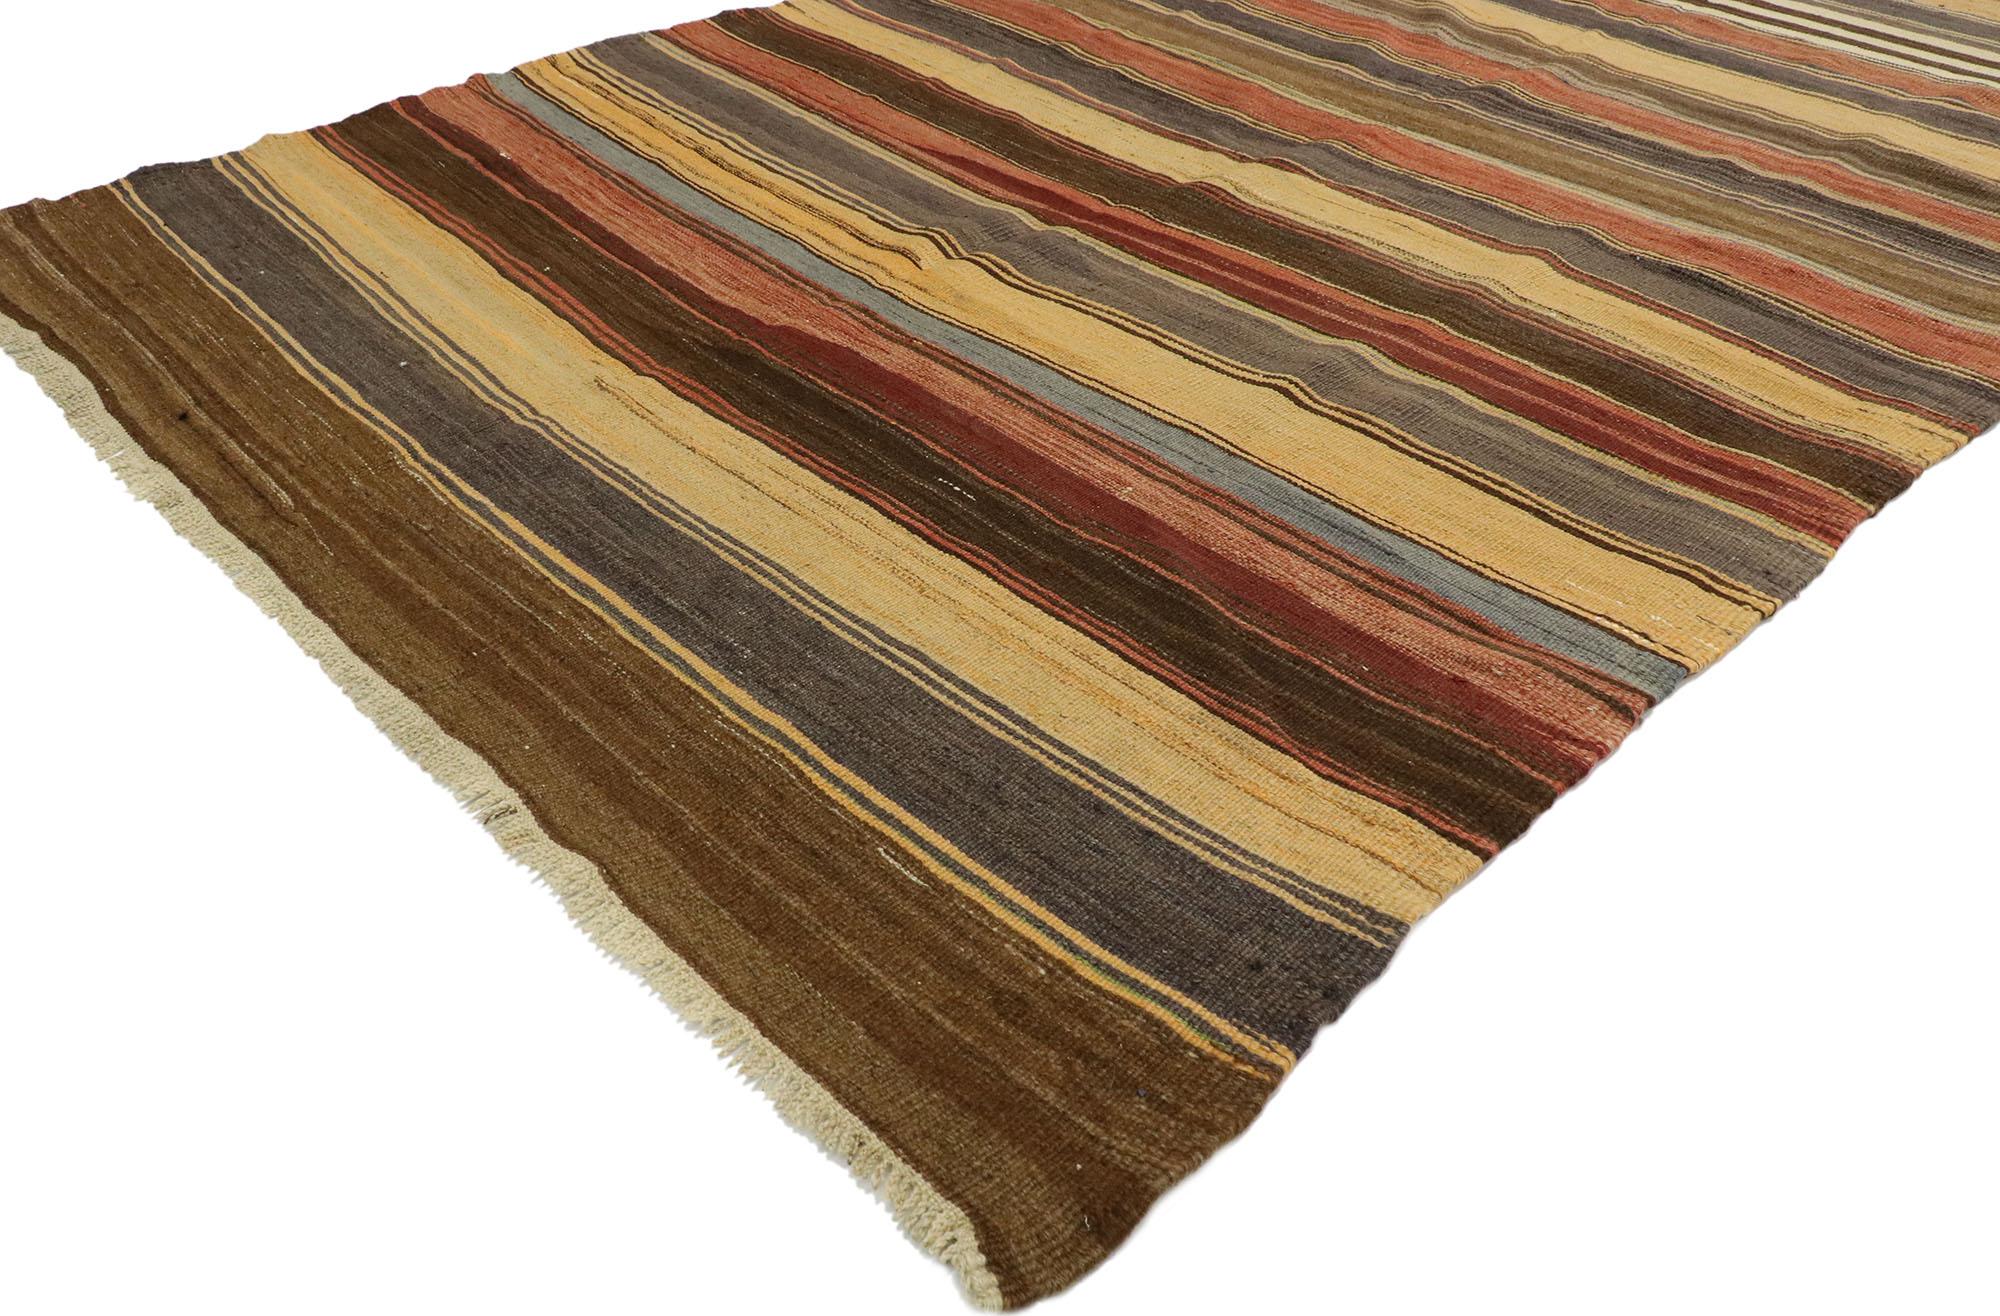 53128, vintage Turkish striped Kilim rug with modern rustic cabin style. With its warm hues and rugged beauty, this handwoven wool striped kilim rug manages to meld contemporary, modern, and traditional design elements. The flat-weave kilim rug